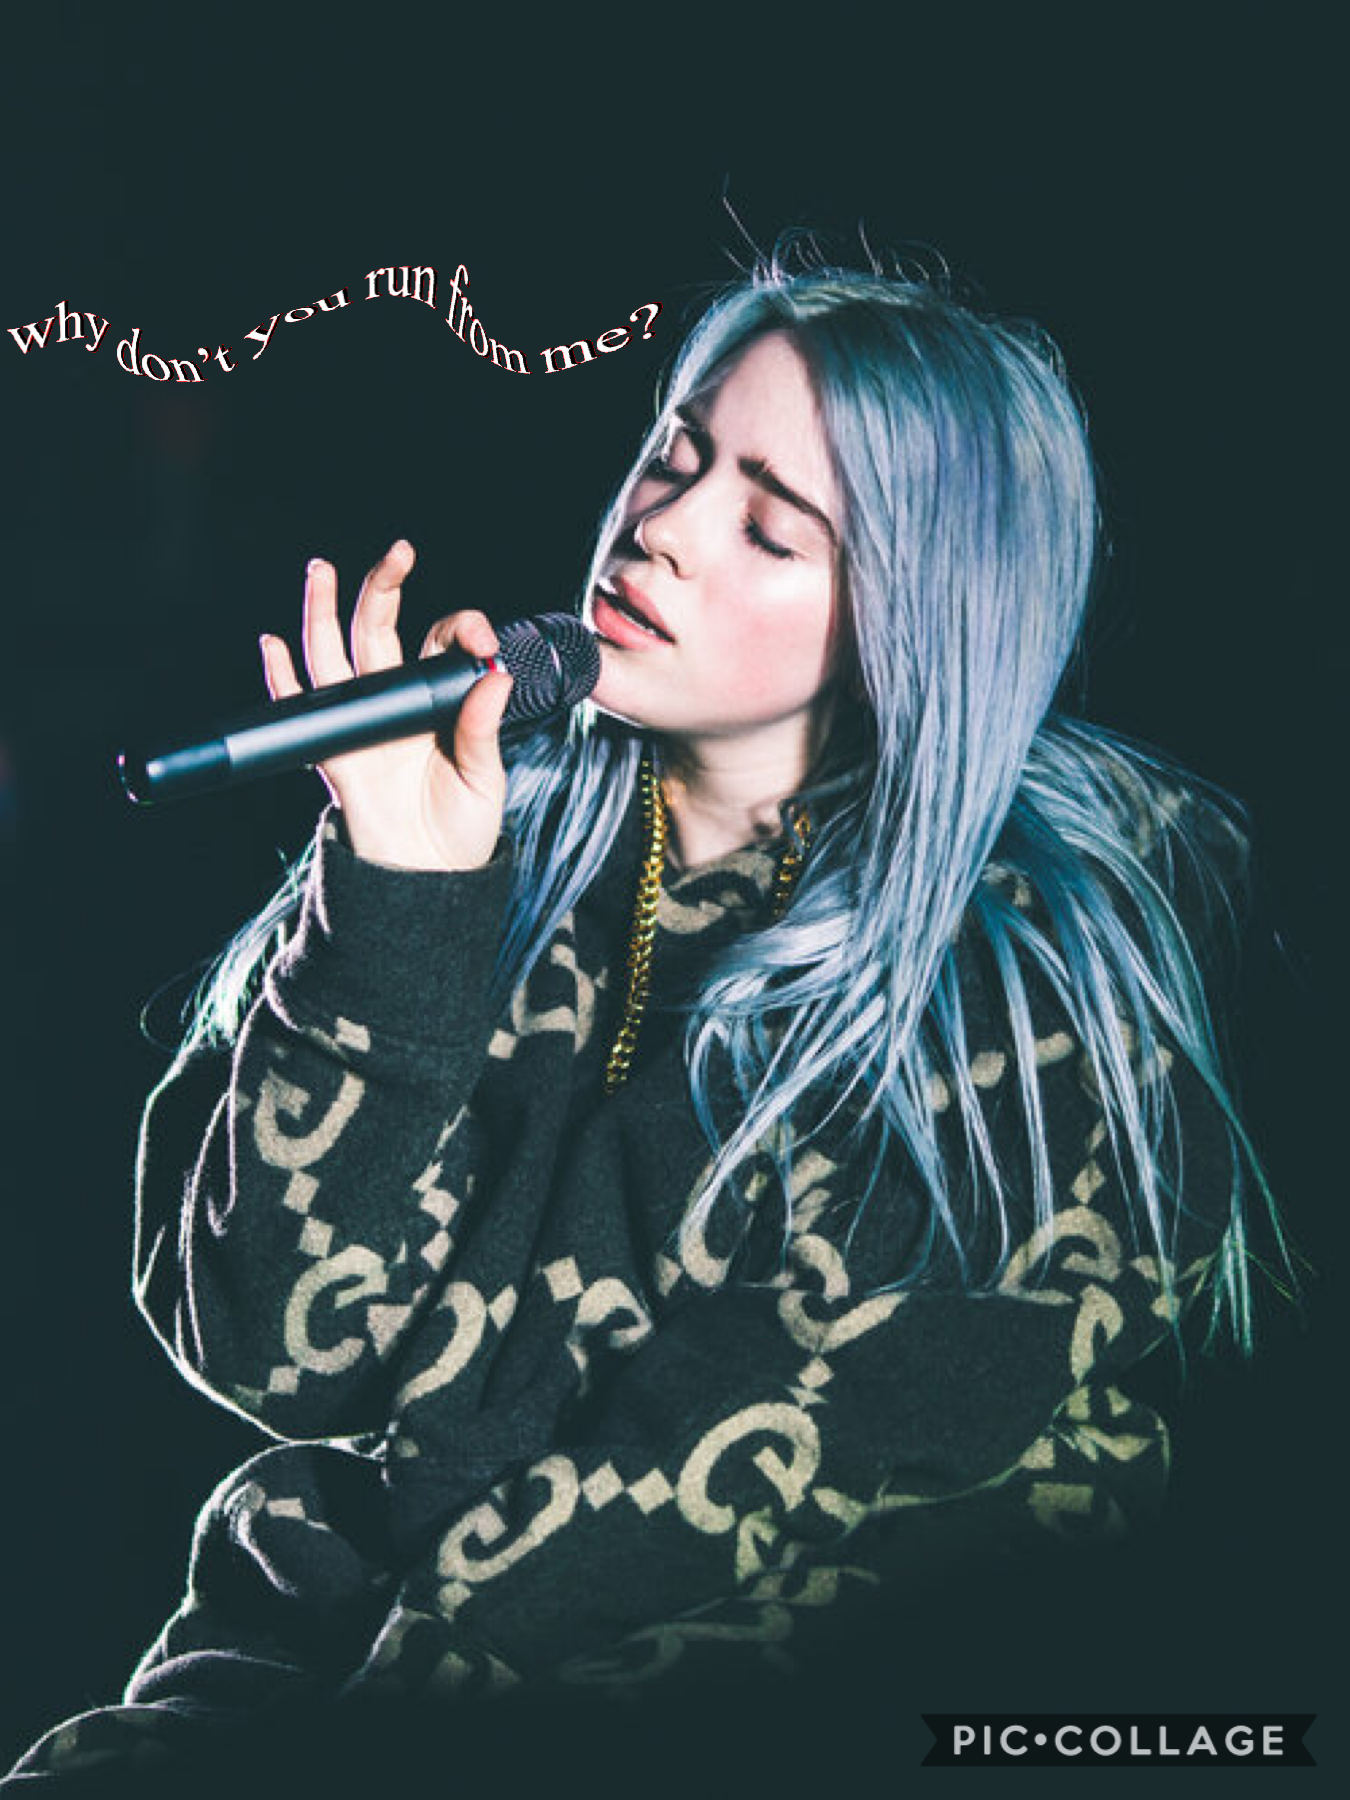 🖤 tap 💚 
Sorry for posting so much Billie collages I’m just on a Billie spree rn 😆 💚 